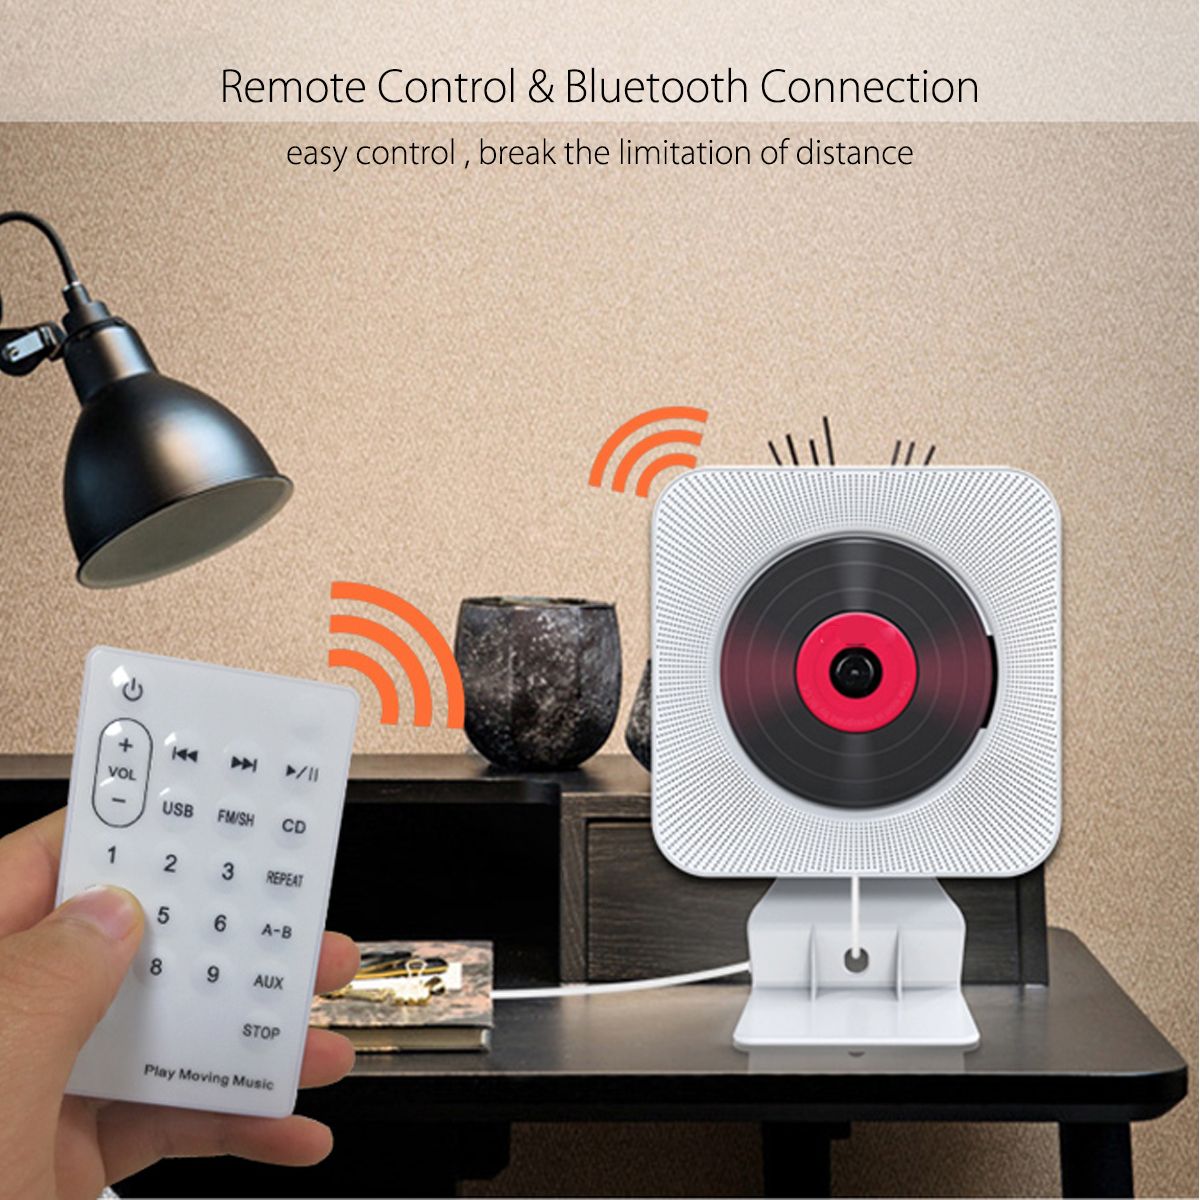 bluetooth-Wall-Mount-Mountable-HD-DVD-Player-Speaker-Remote-Control-FM-Stereo-1402837